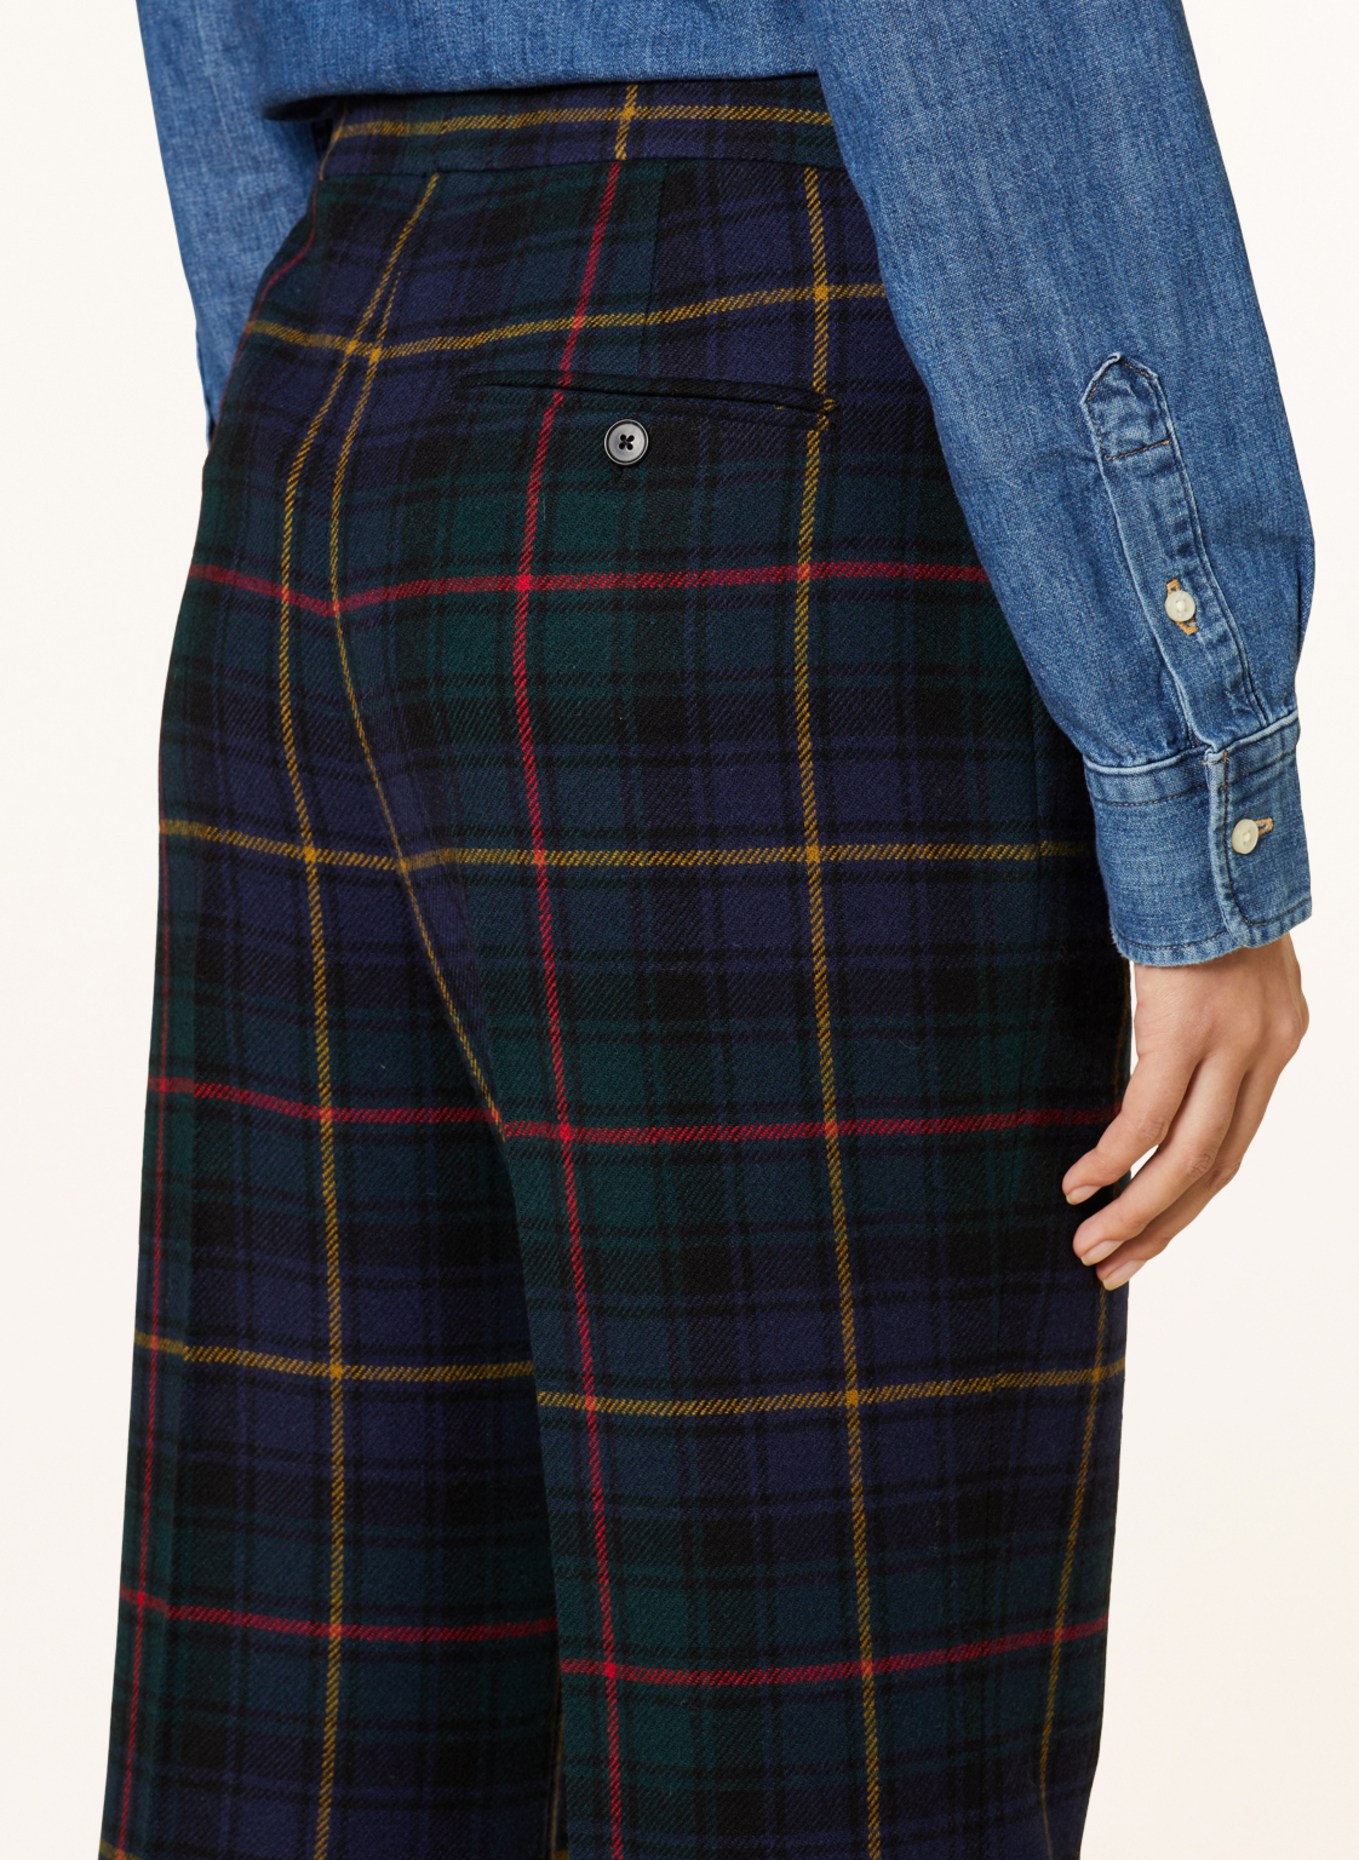 POLO RALPH LAUREN Bootcut trousers in flannel, Color: DARK BLUE/ RED/ DARK YELLOW (Image 5)